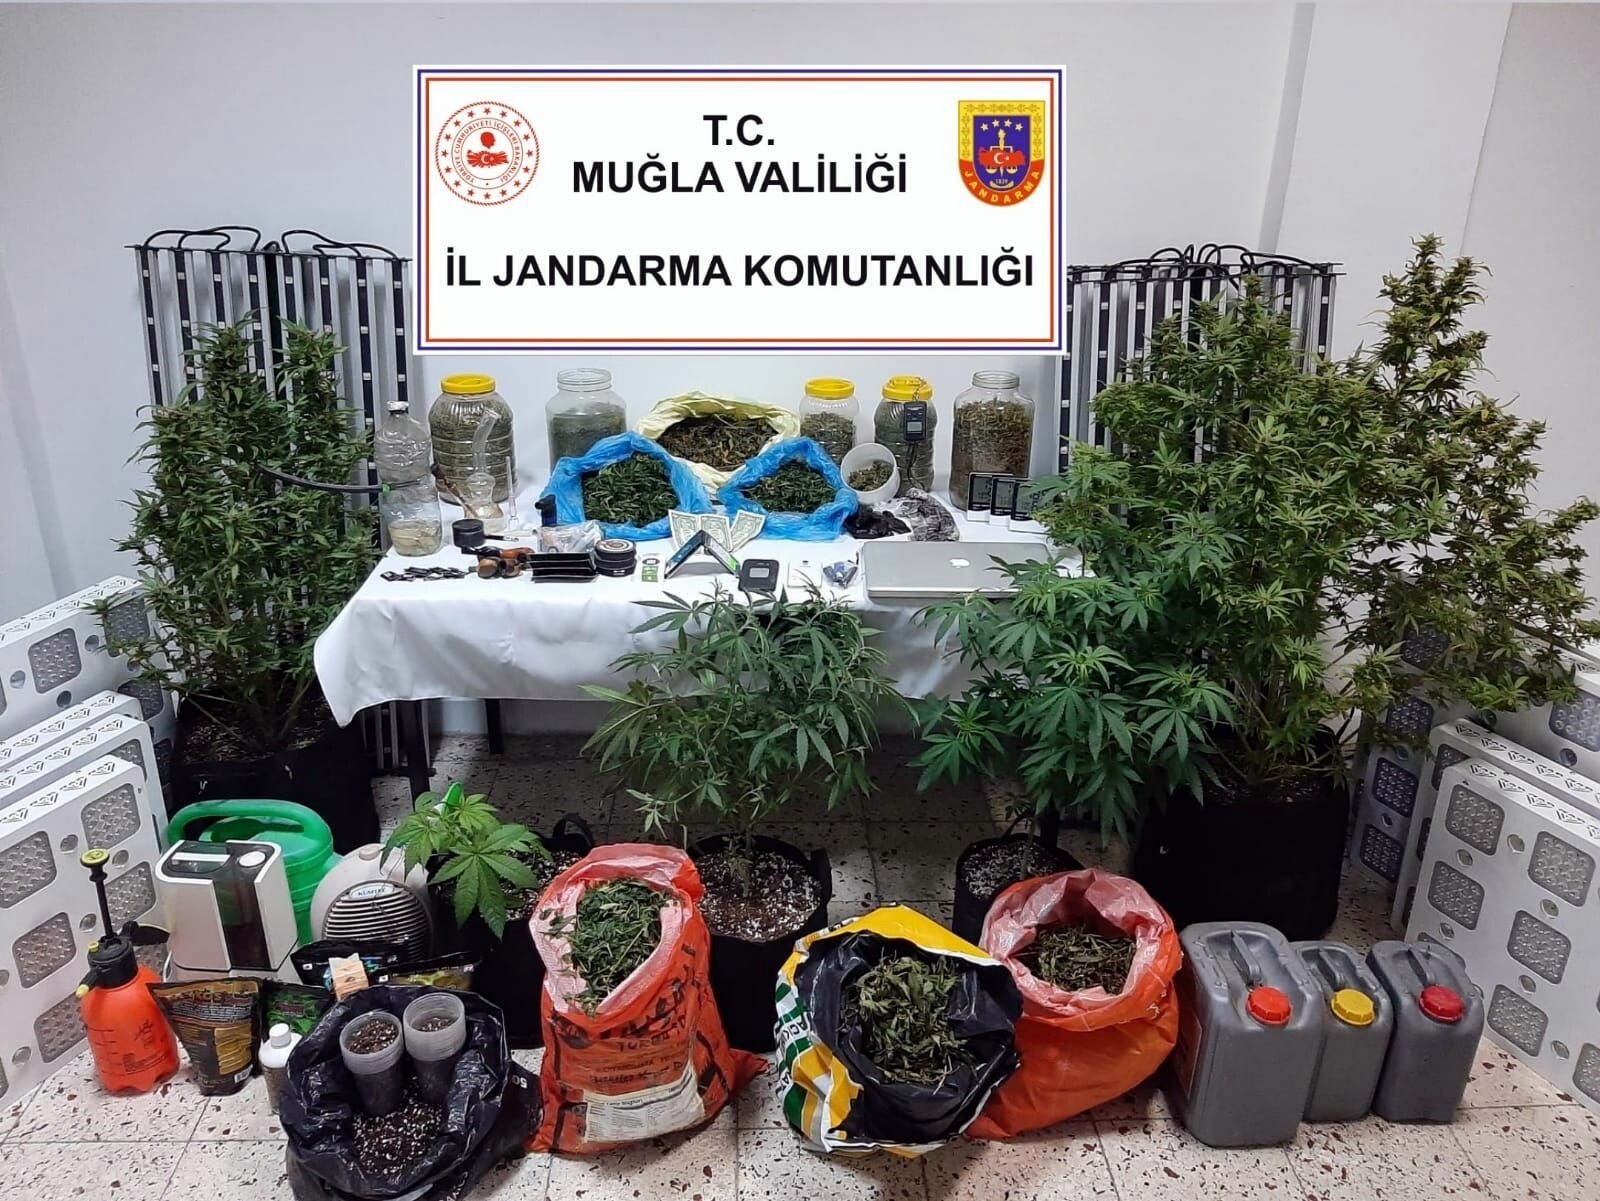 View of drugs and equipment seized in the operation, in Muğla, southwestern Türkiye, Oct. 13, 2022. (DHA PHOTO) 